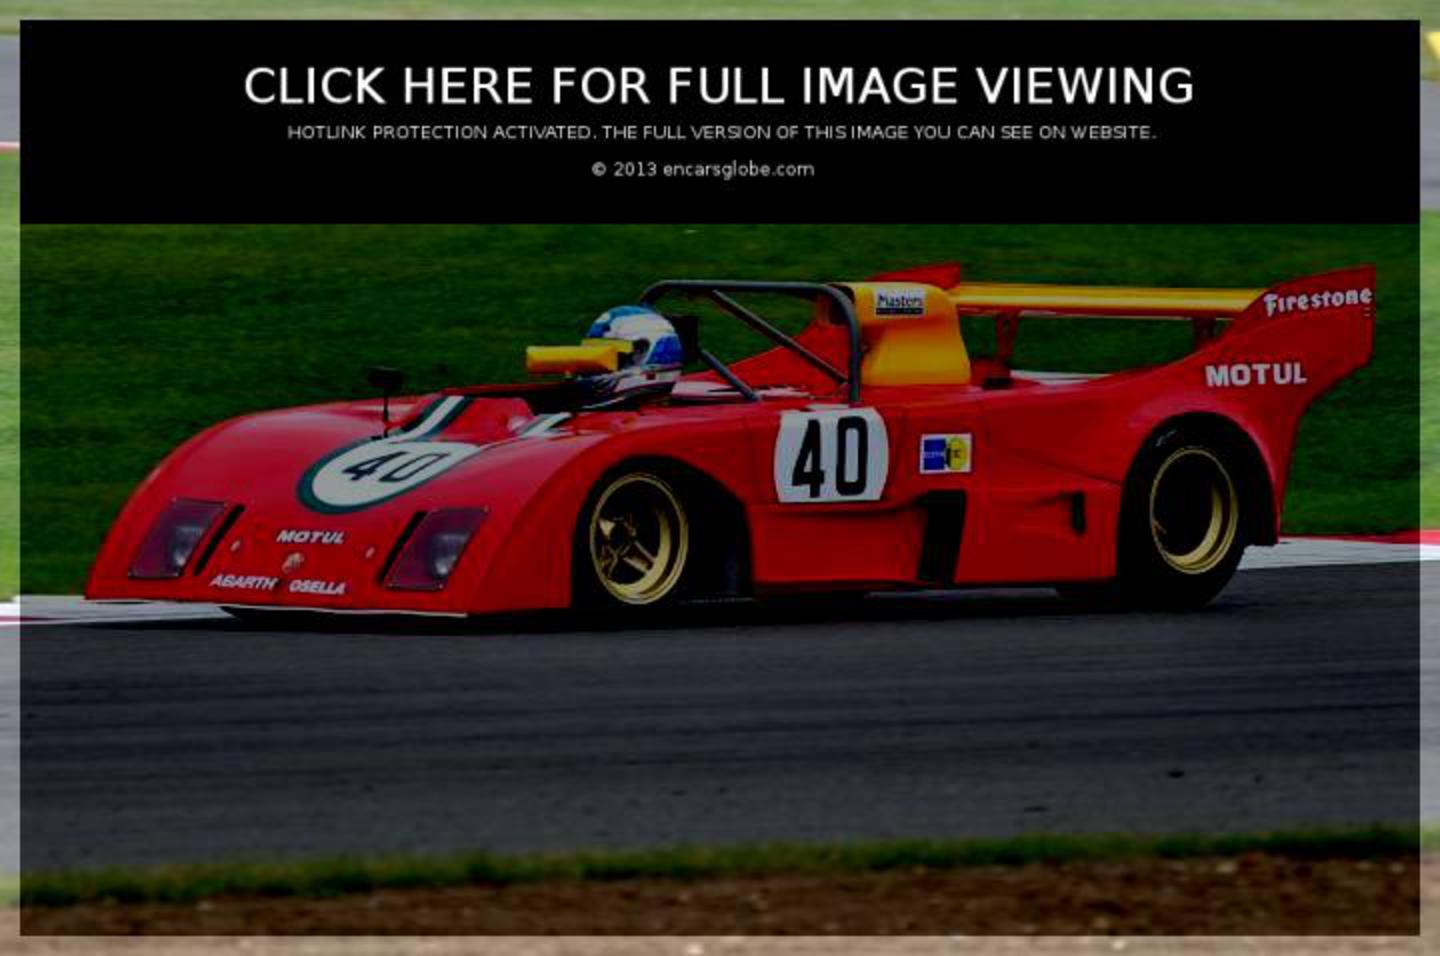 Abarth Osella PA 1 Photo Gallery: Photo #12 out of 8, Image Size ...